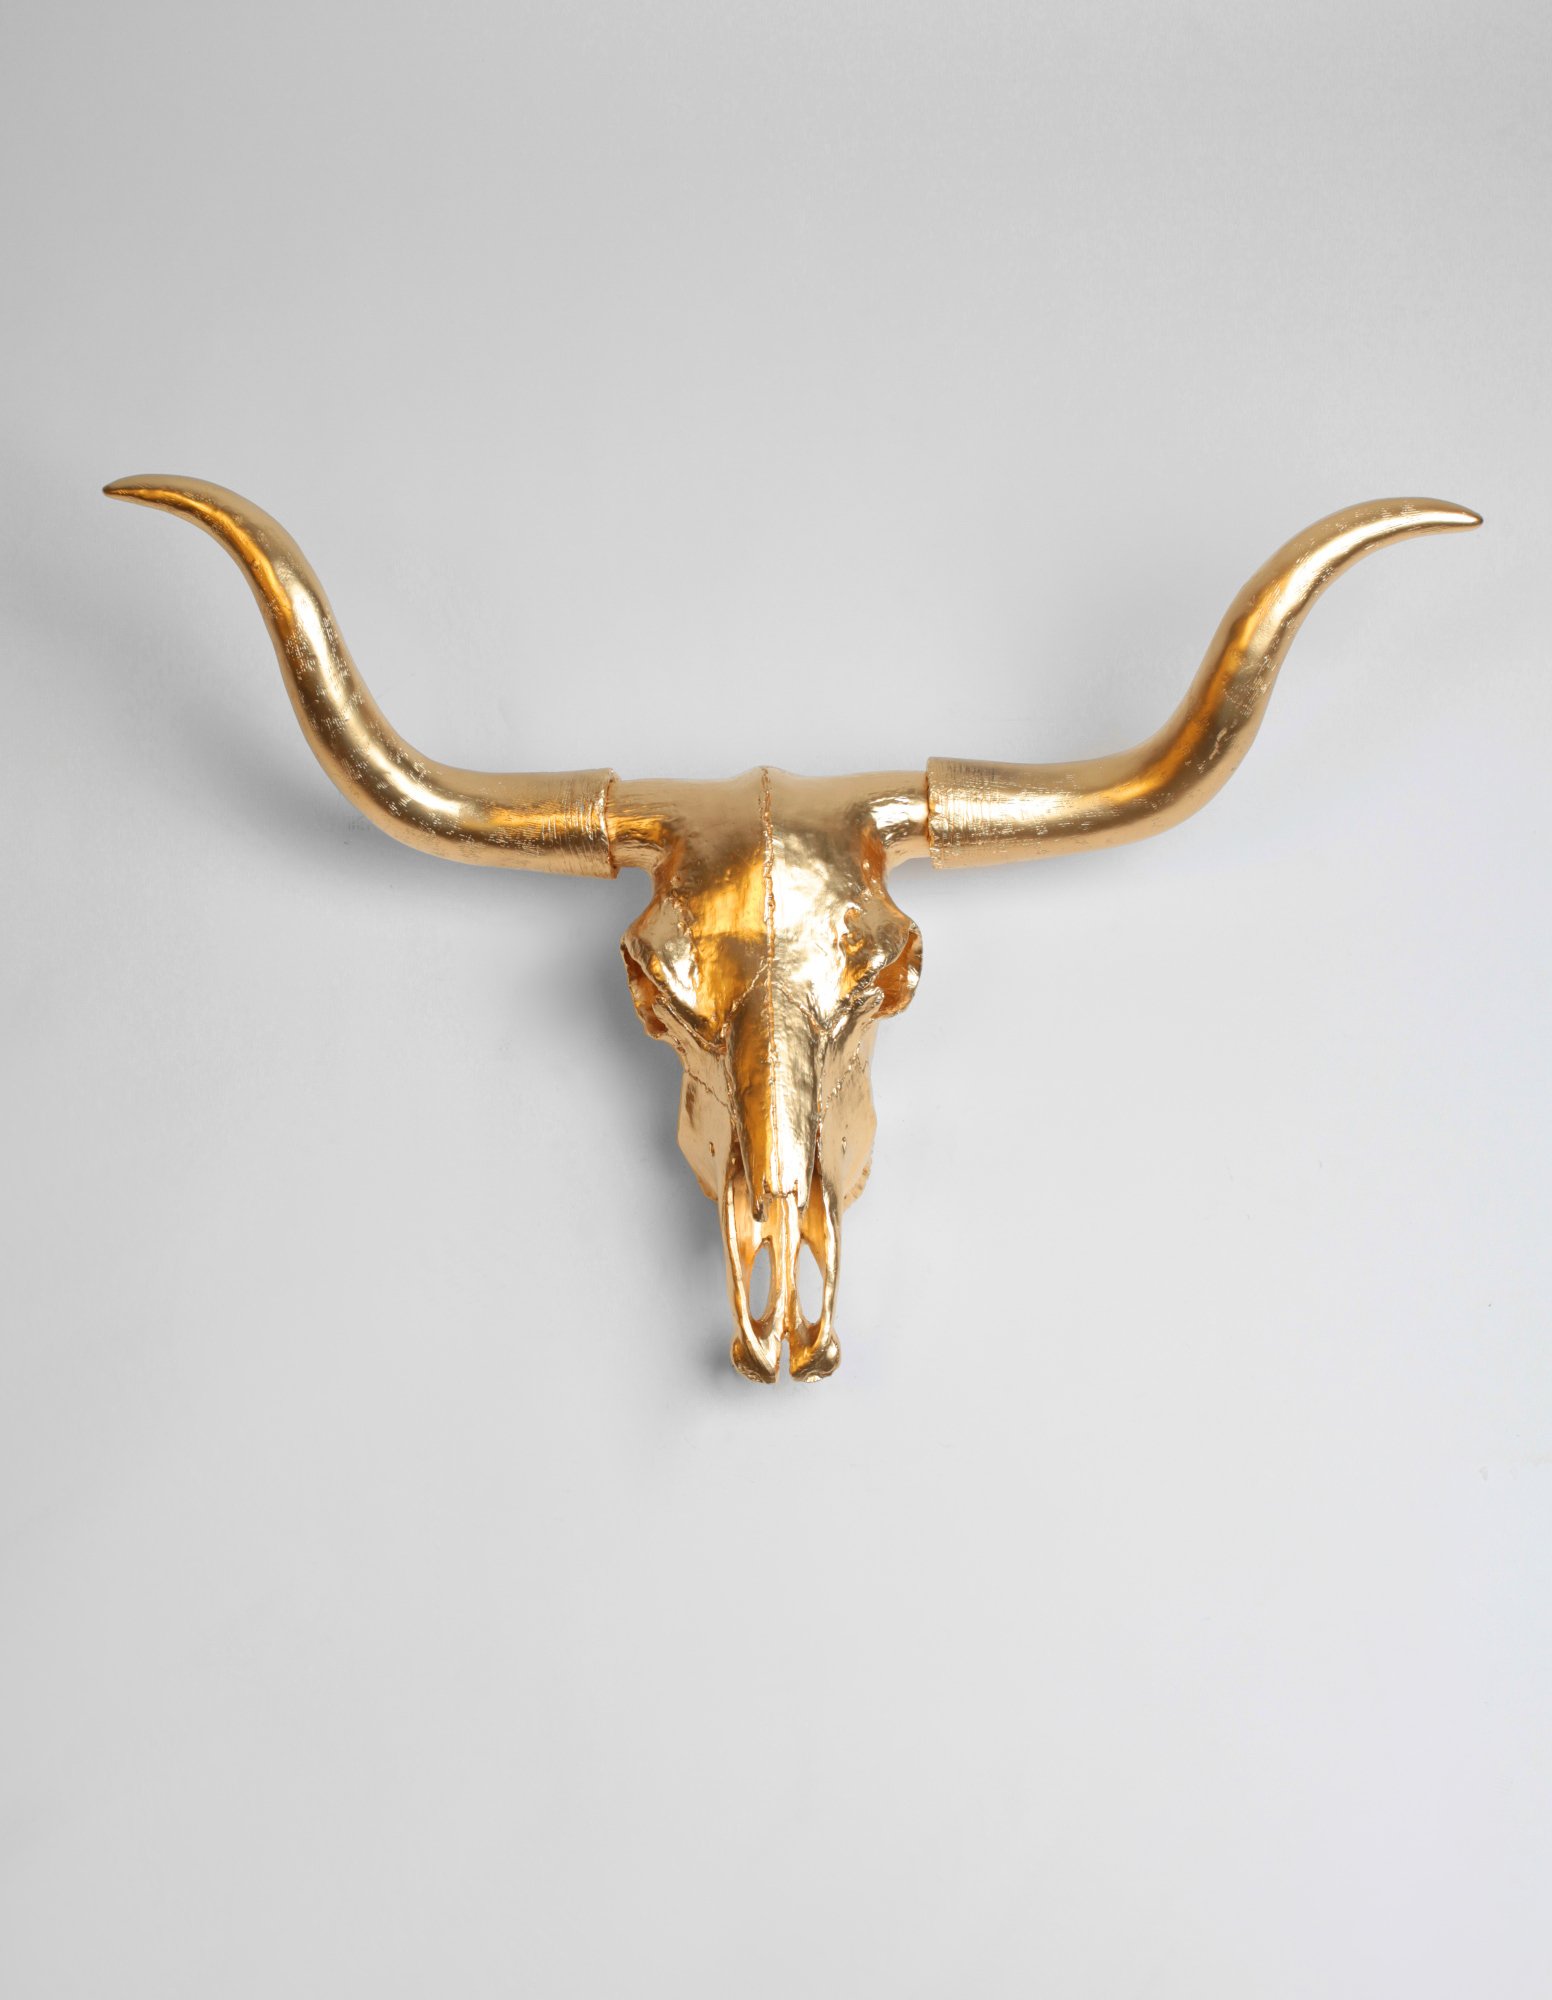 Gold Faux Longhorn Cow Skull Decor Sculpture, The Cheyenne – White ...